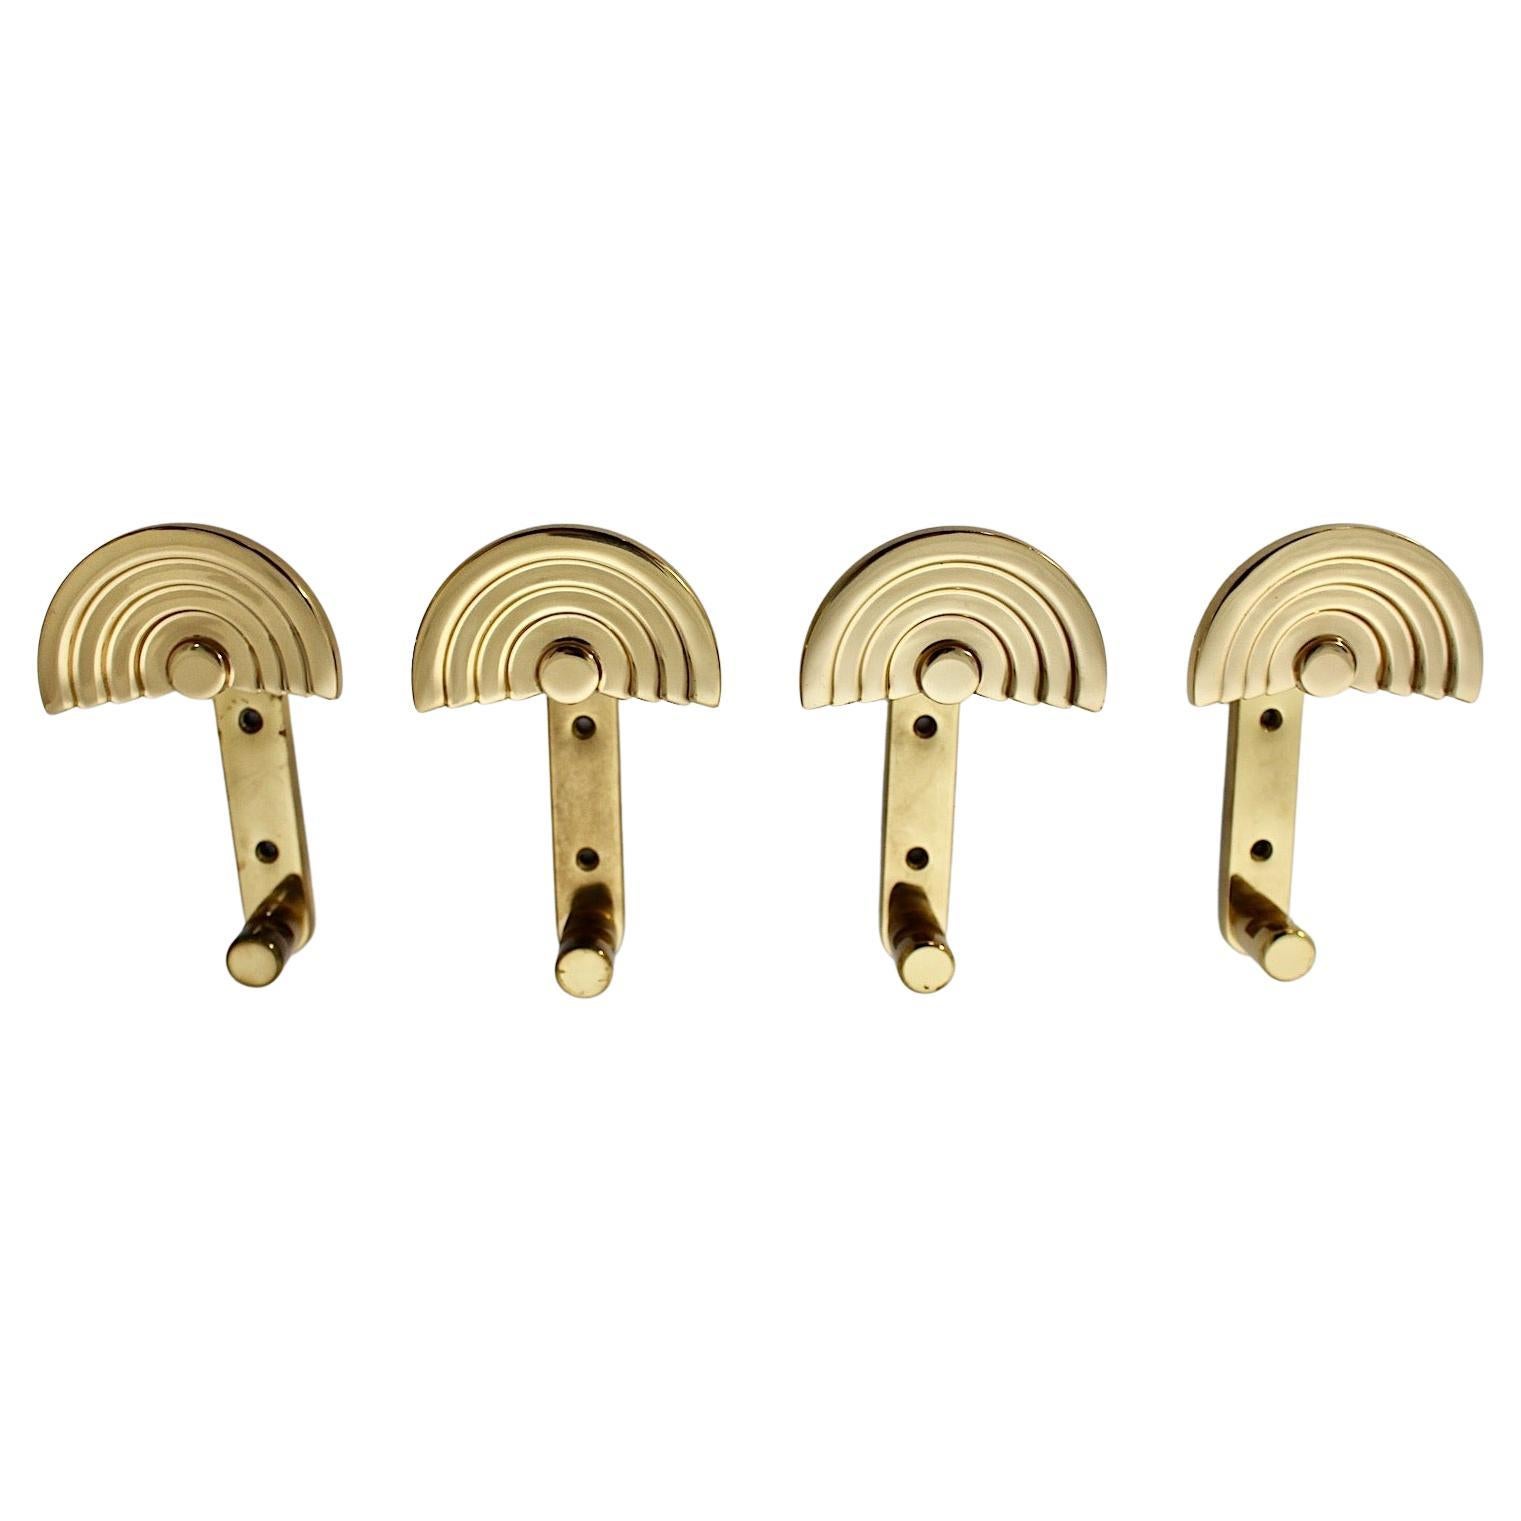 Ettore Sottsass Vintage Brass Four Wall Hooks or Coat Hooks circa 1985 Italy For Sale